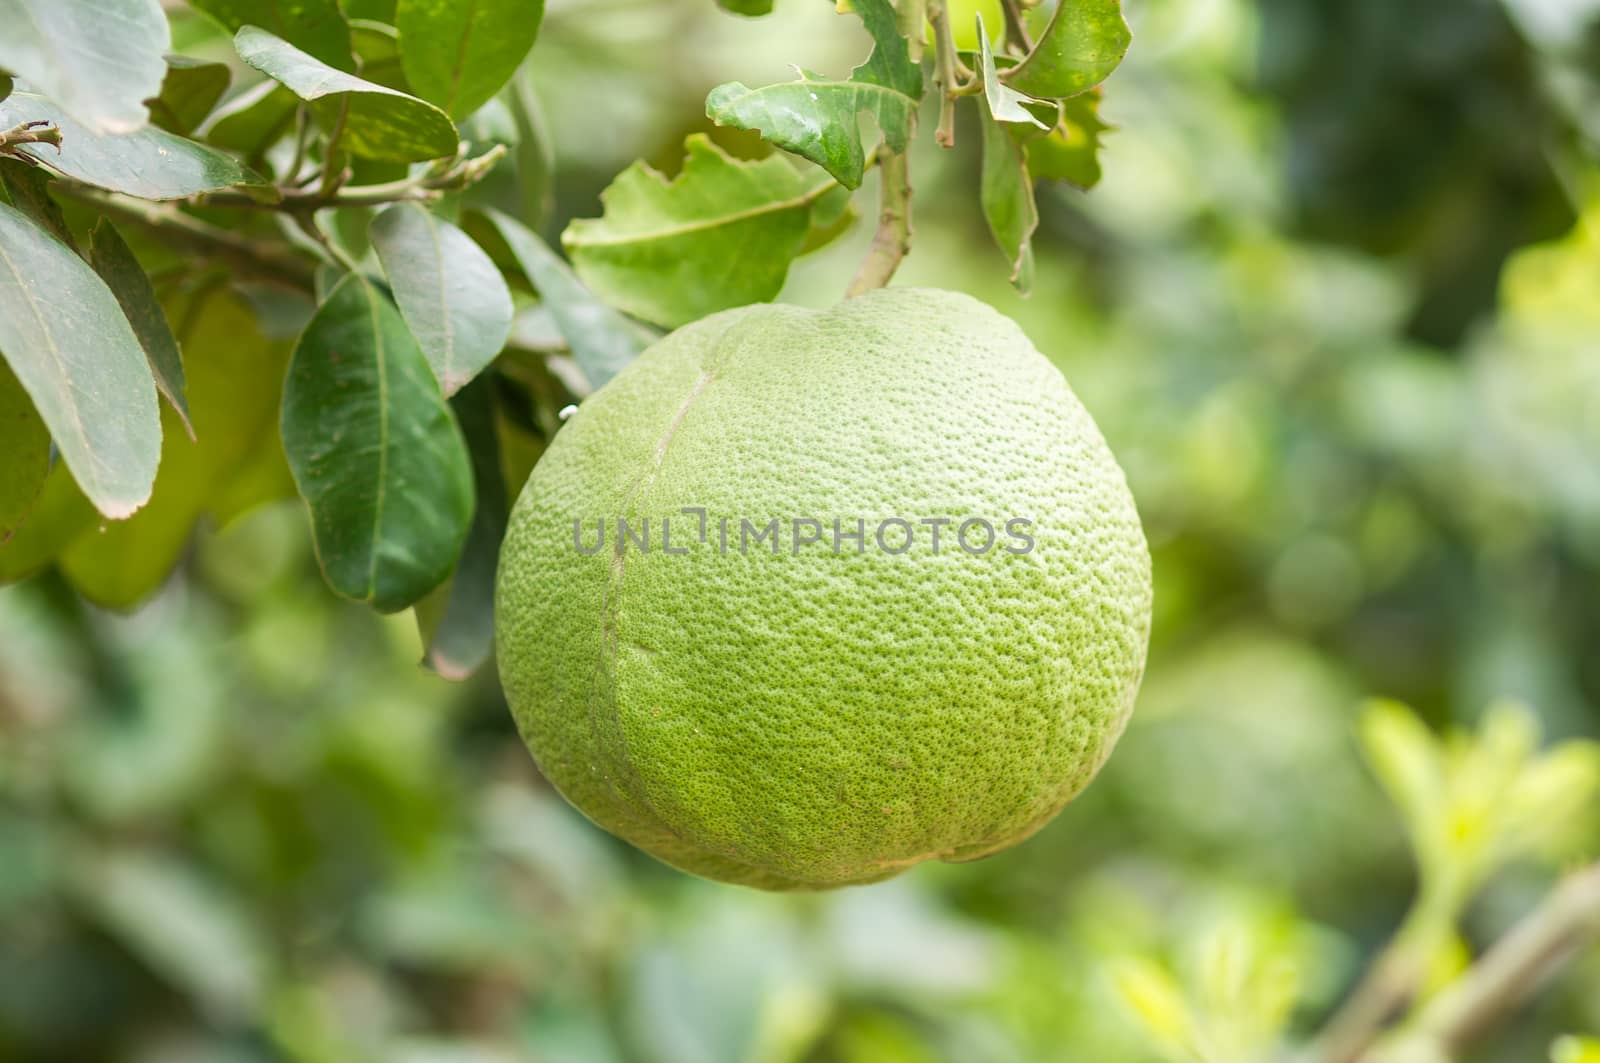 Pomelo fruit on tree with bokeh background